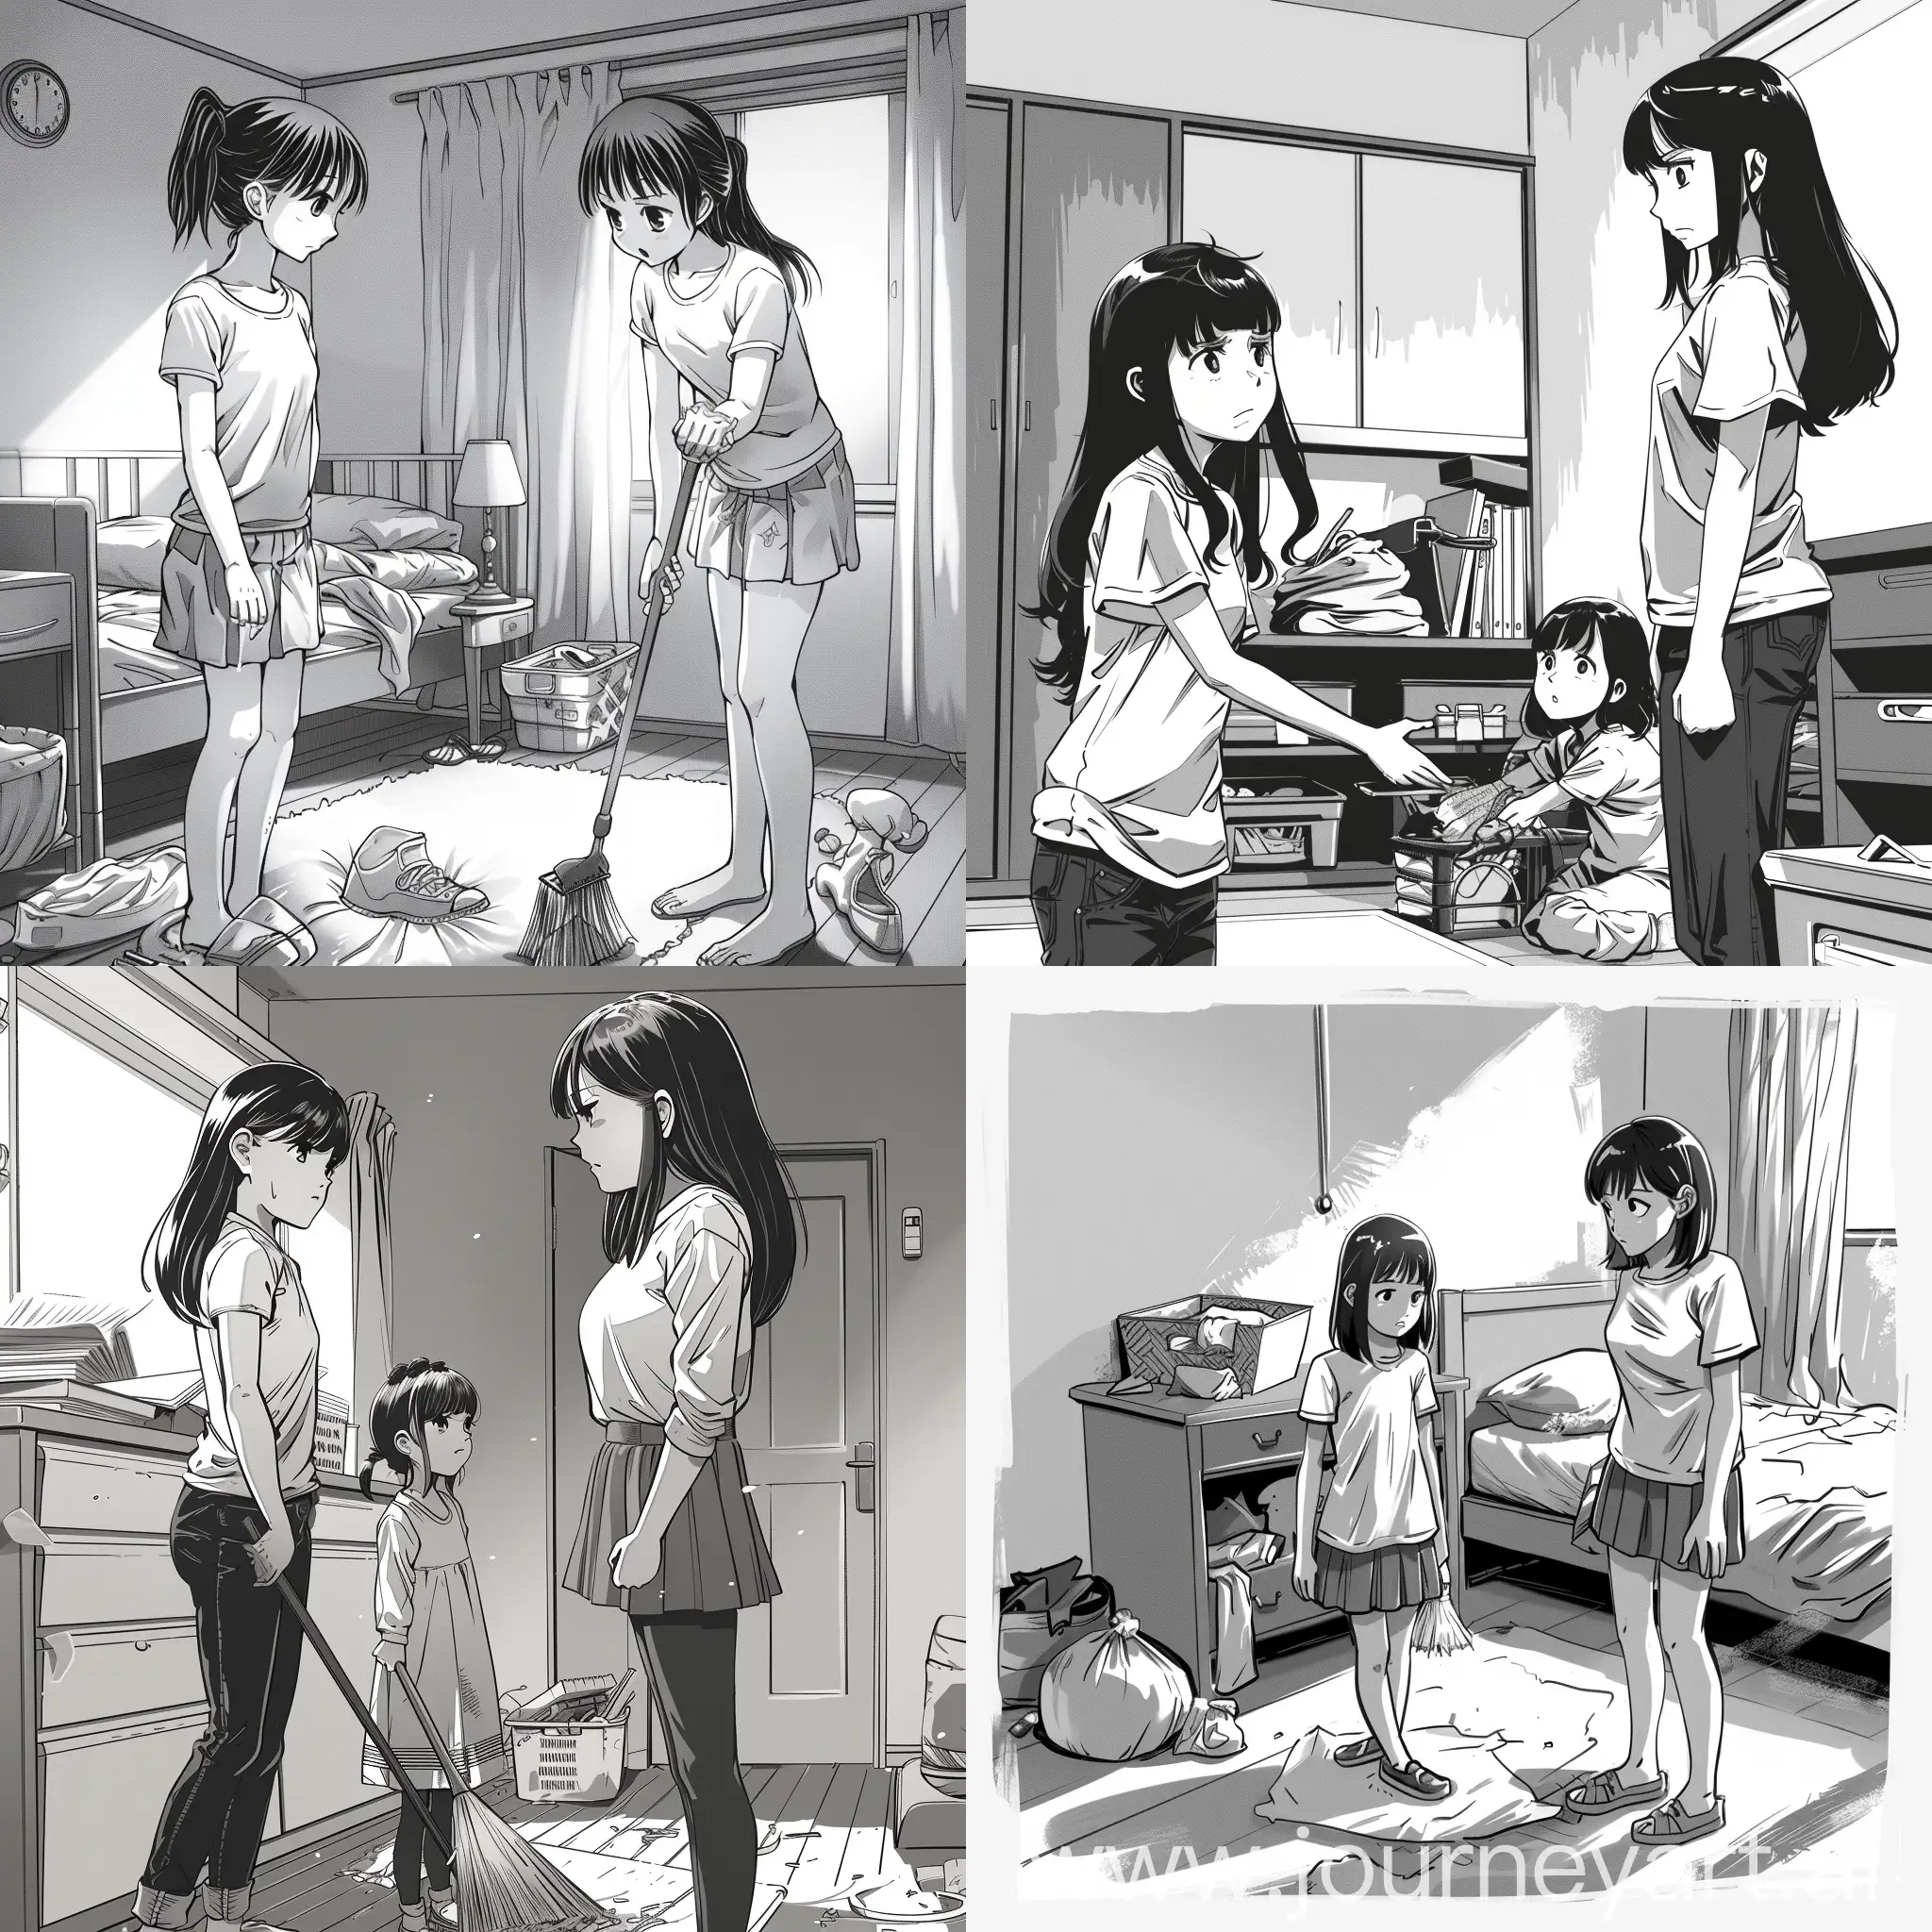 Mother-Directs-Daughter-in-MangaStyle-Room-Cleanup